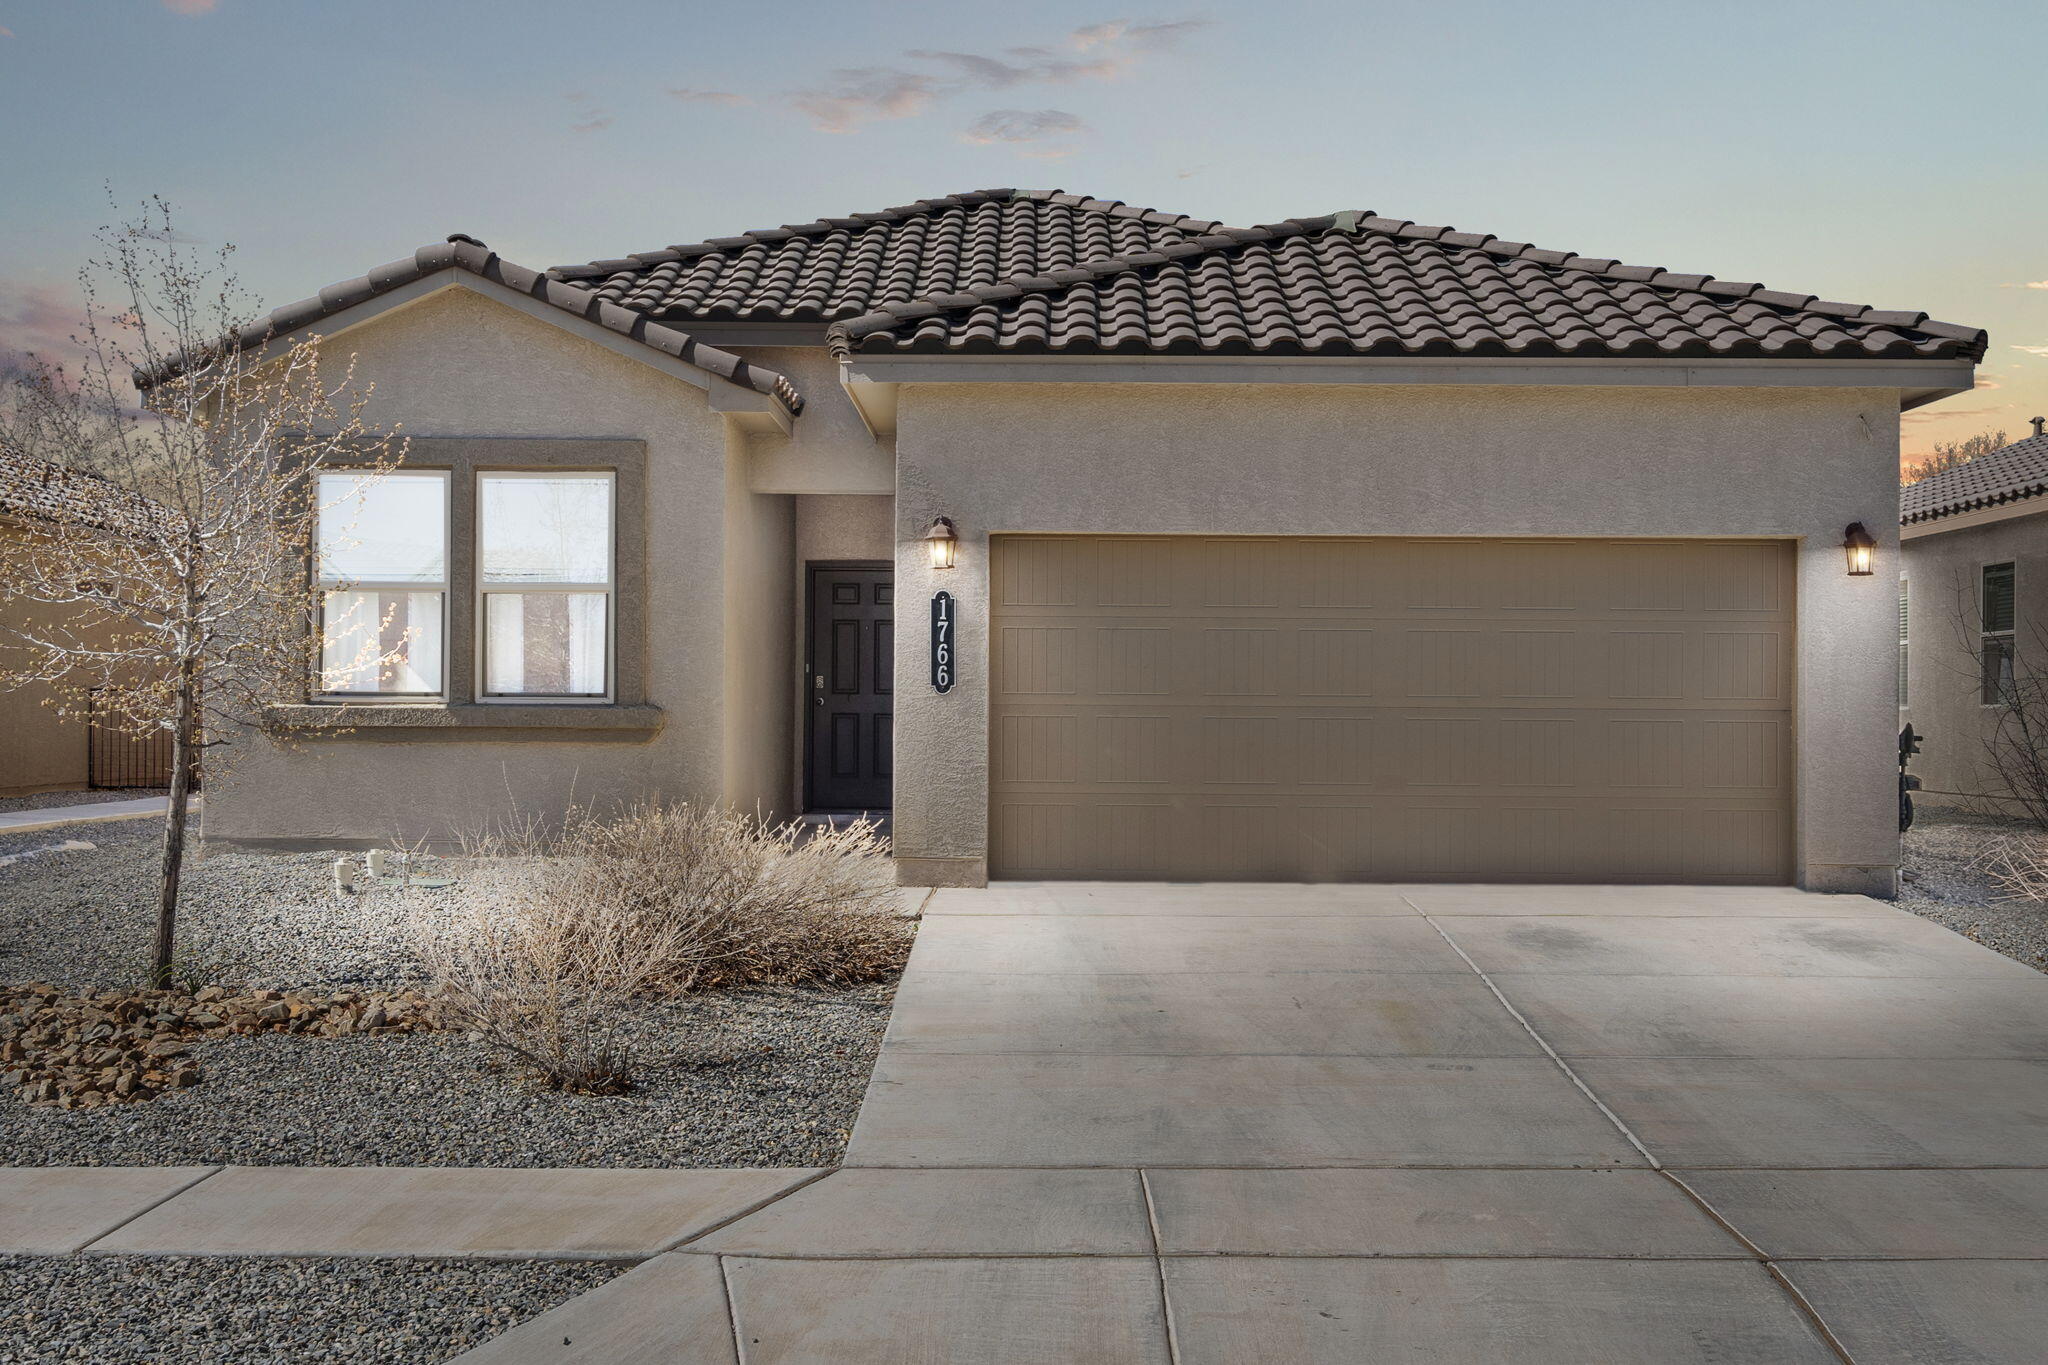 This home qualifies for a Homebuyer Grant from Chase Bank! Discover modern living in the tranquil Village of Los Lunas. This 5-year-old, single-story home features 4 bedrooms, 1 full bath, a 3/4 primary bath, and a 2-car garage. Enjoy a new freestanding gas range & oven (Feb 2024), new carpet (Feb 2024), stylish tile flooring, and refrigerated air conditioning. The low maintenance landscaped yards are a delight. Located conveniently close to shopping, dining, schools, I-25, and just 35 minutes to KAFB and Sandia Labs, it combines convenience with serene living. Miles of walkable, dog-friendly, trails. Perfect for those seeking comfort and ease and an escape from the hustle and bustle.